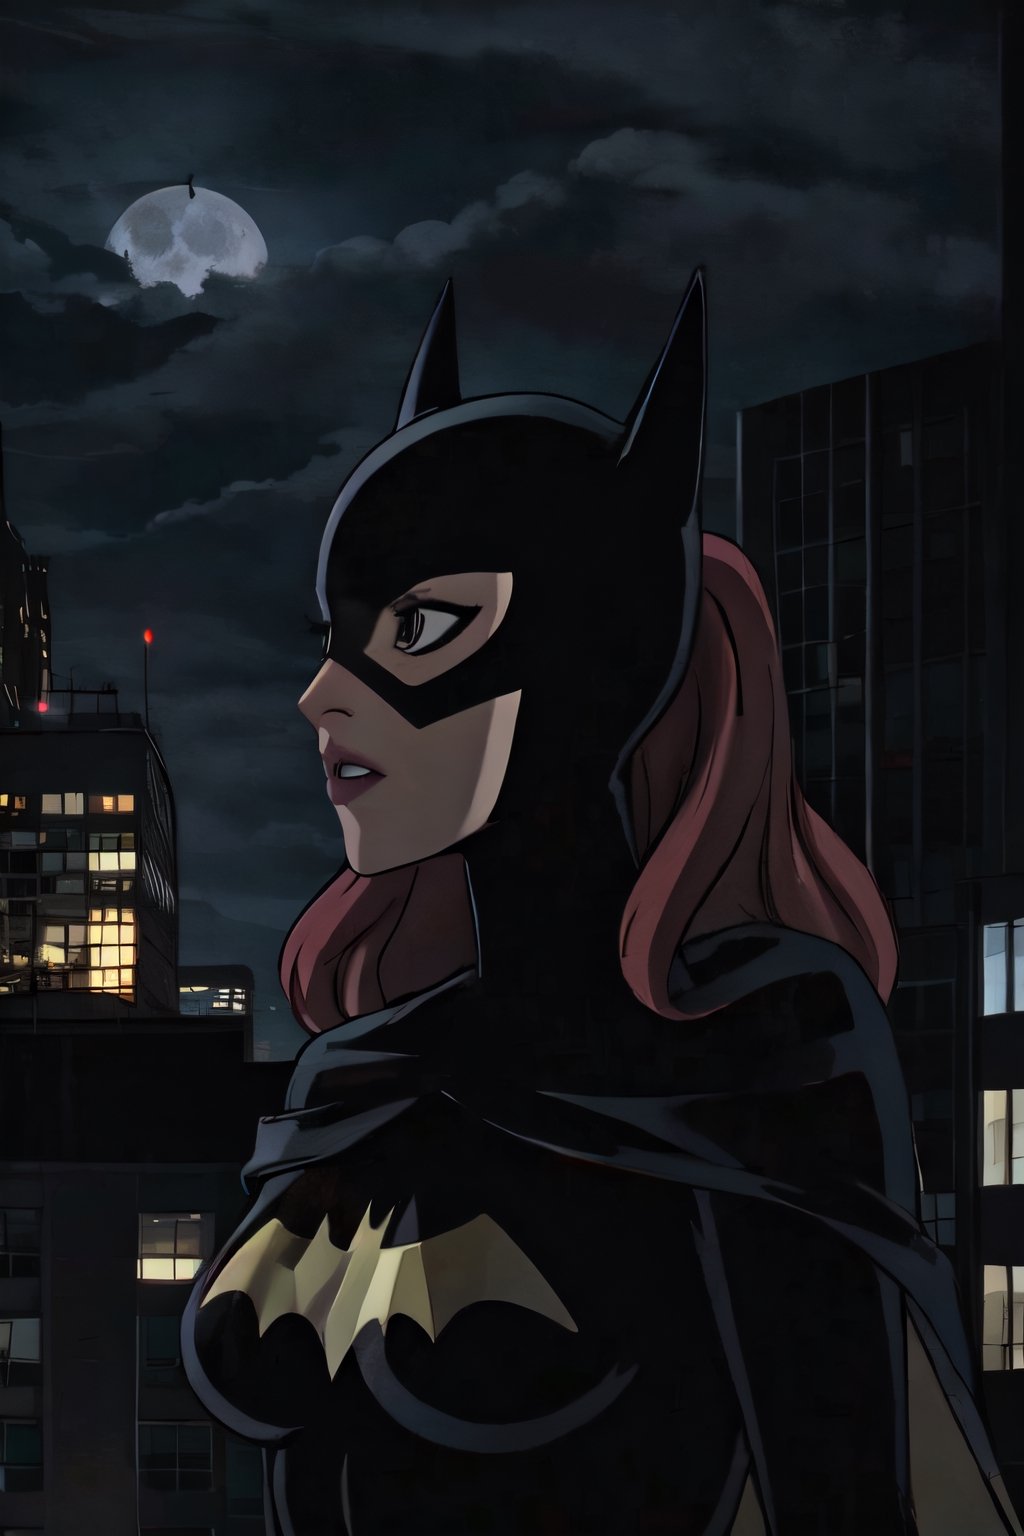 Batgirl, facial portrait, sexy stare, smirked, jumping from building, city below, cloudy sky, lightning, full moon, bats flying,  